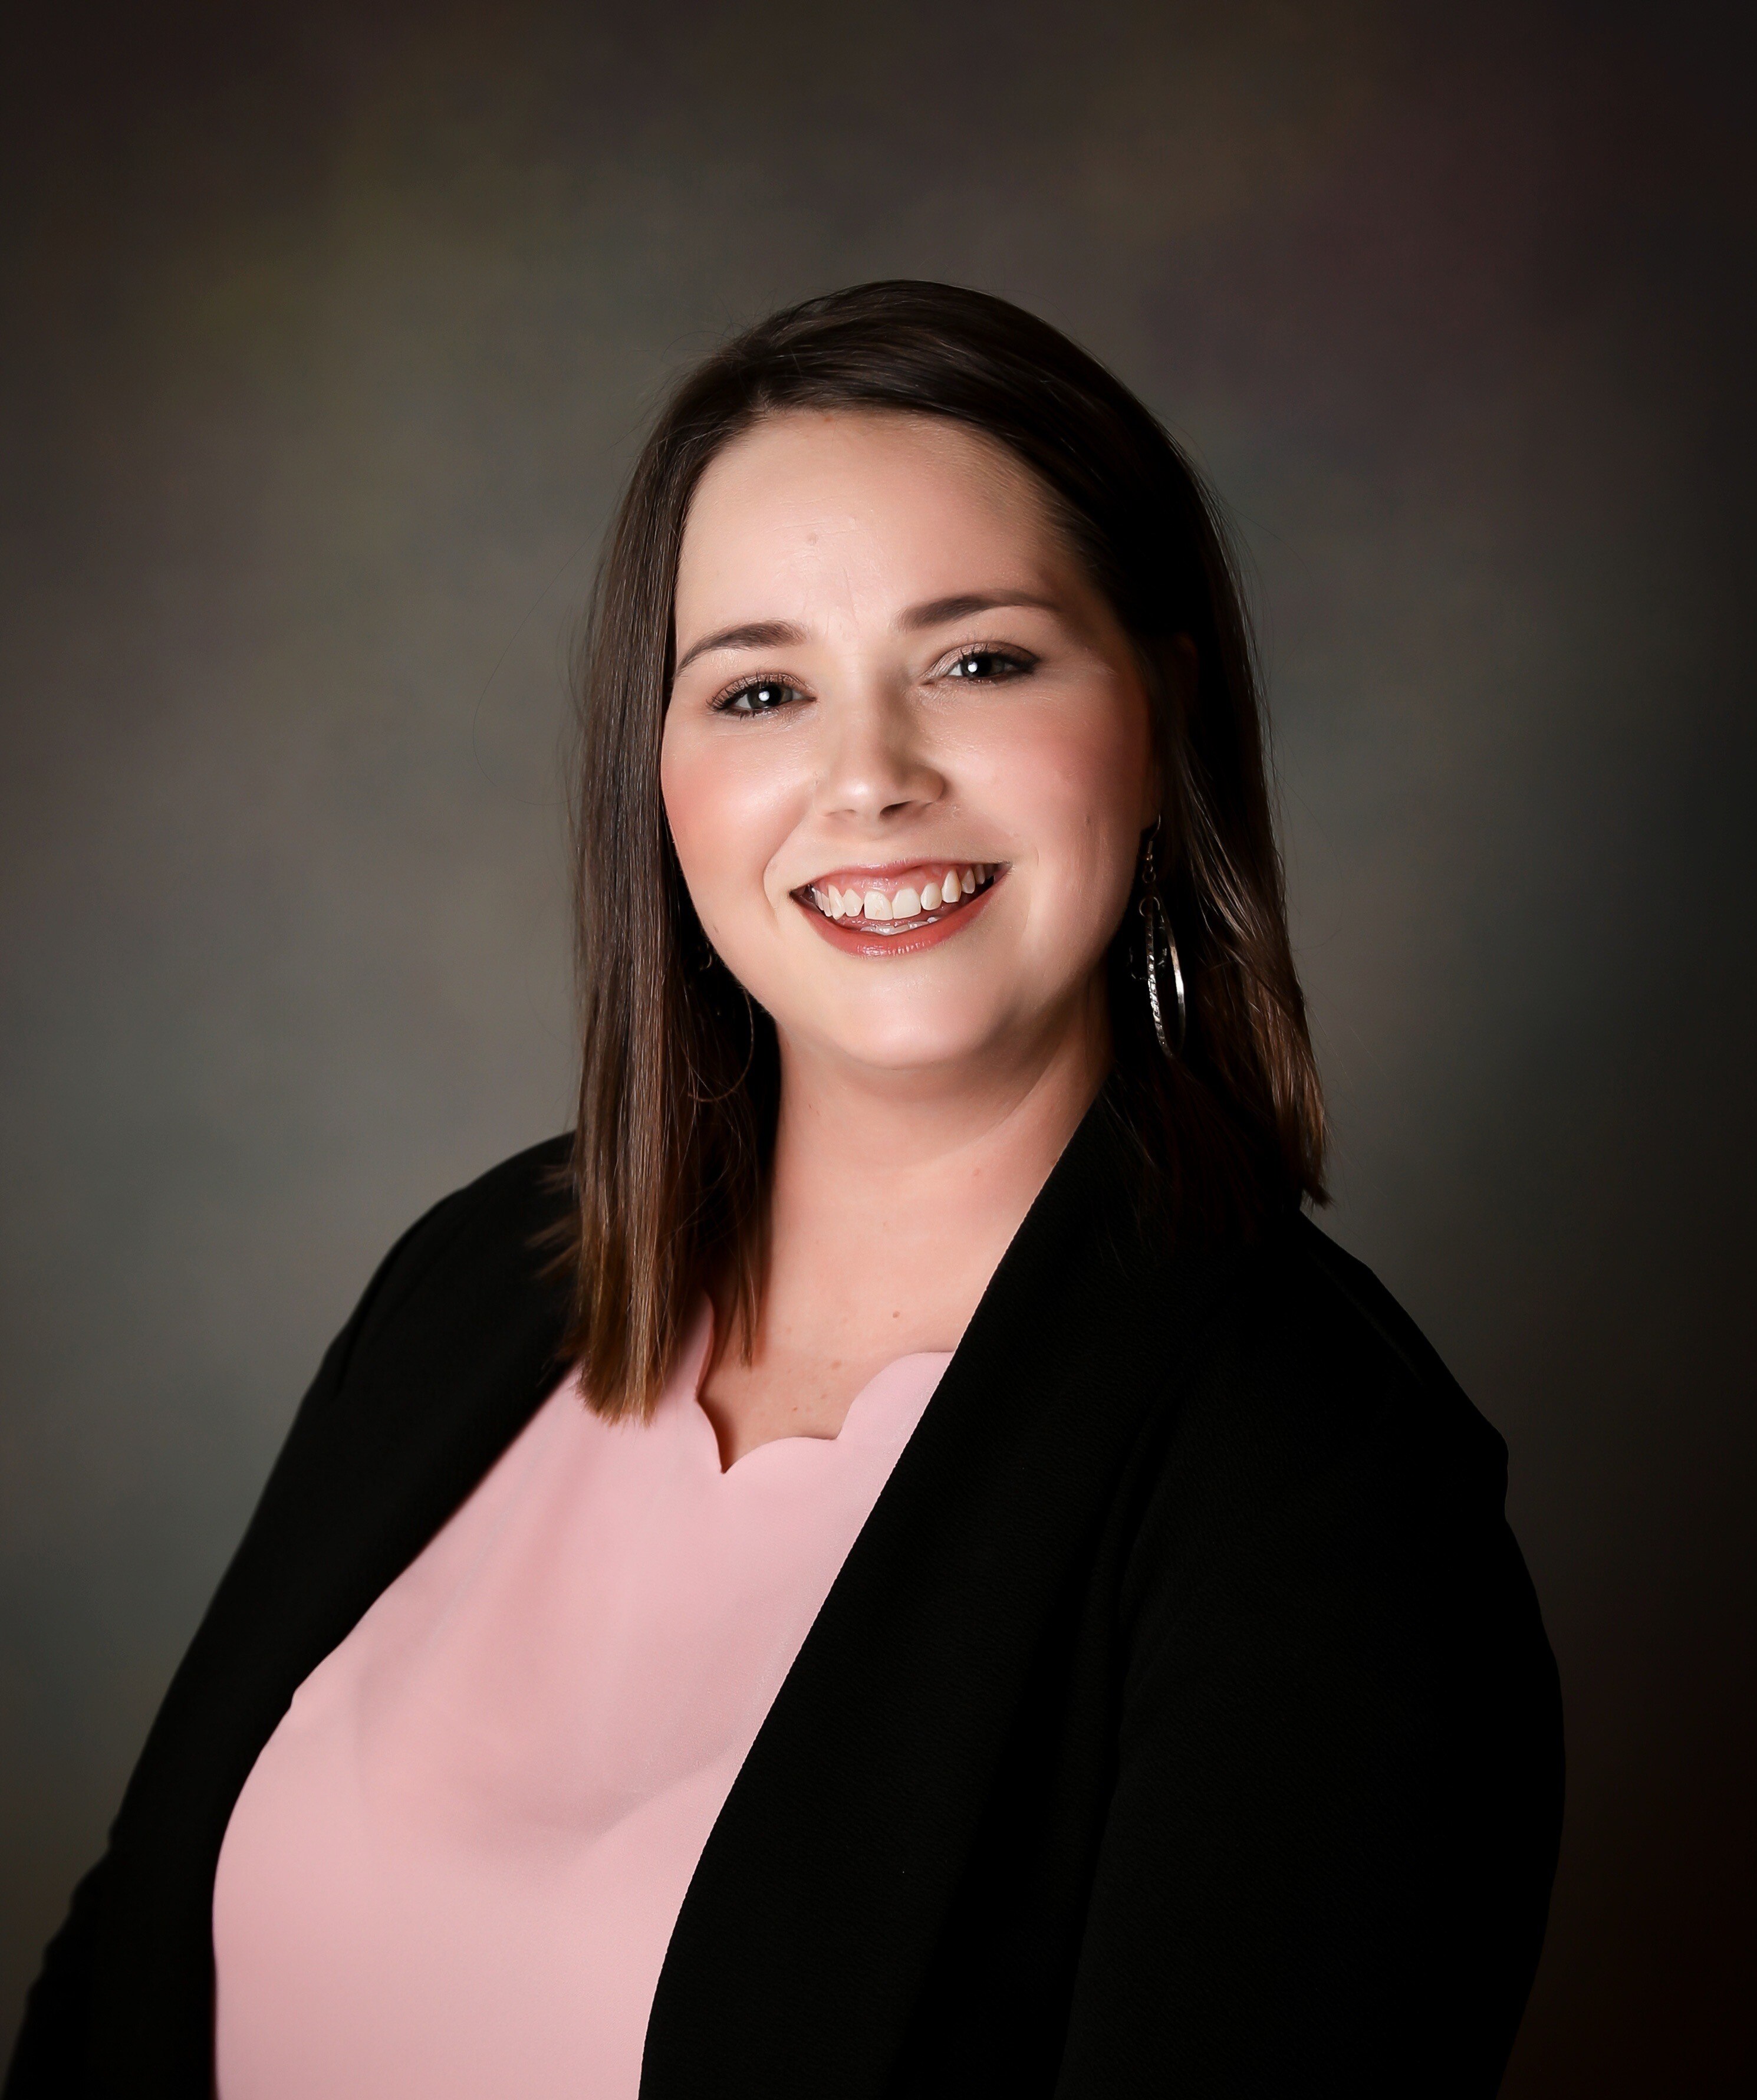 TAYLOR MORGAN ROCHELEAU  Your Financial Professional & Insurance Agent